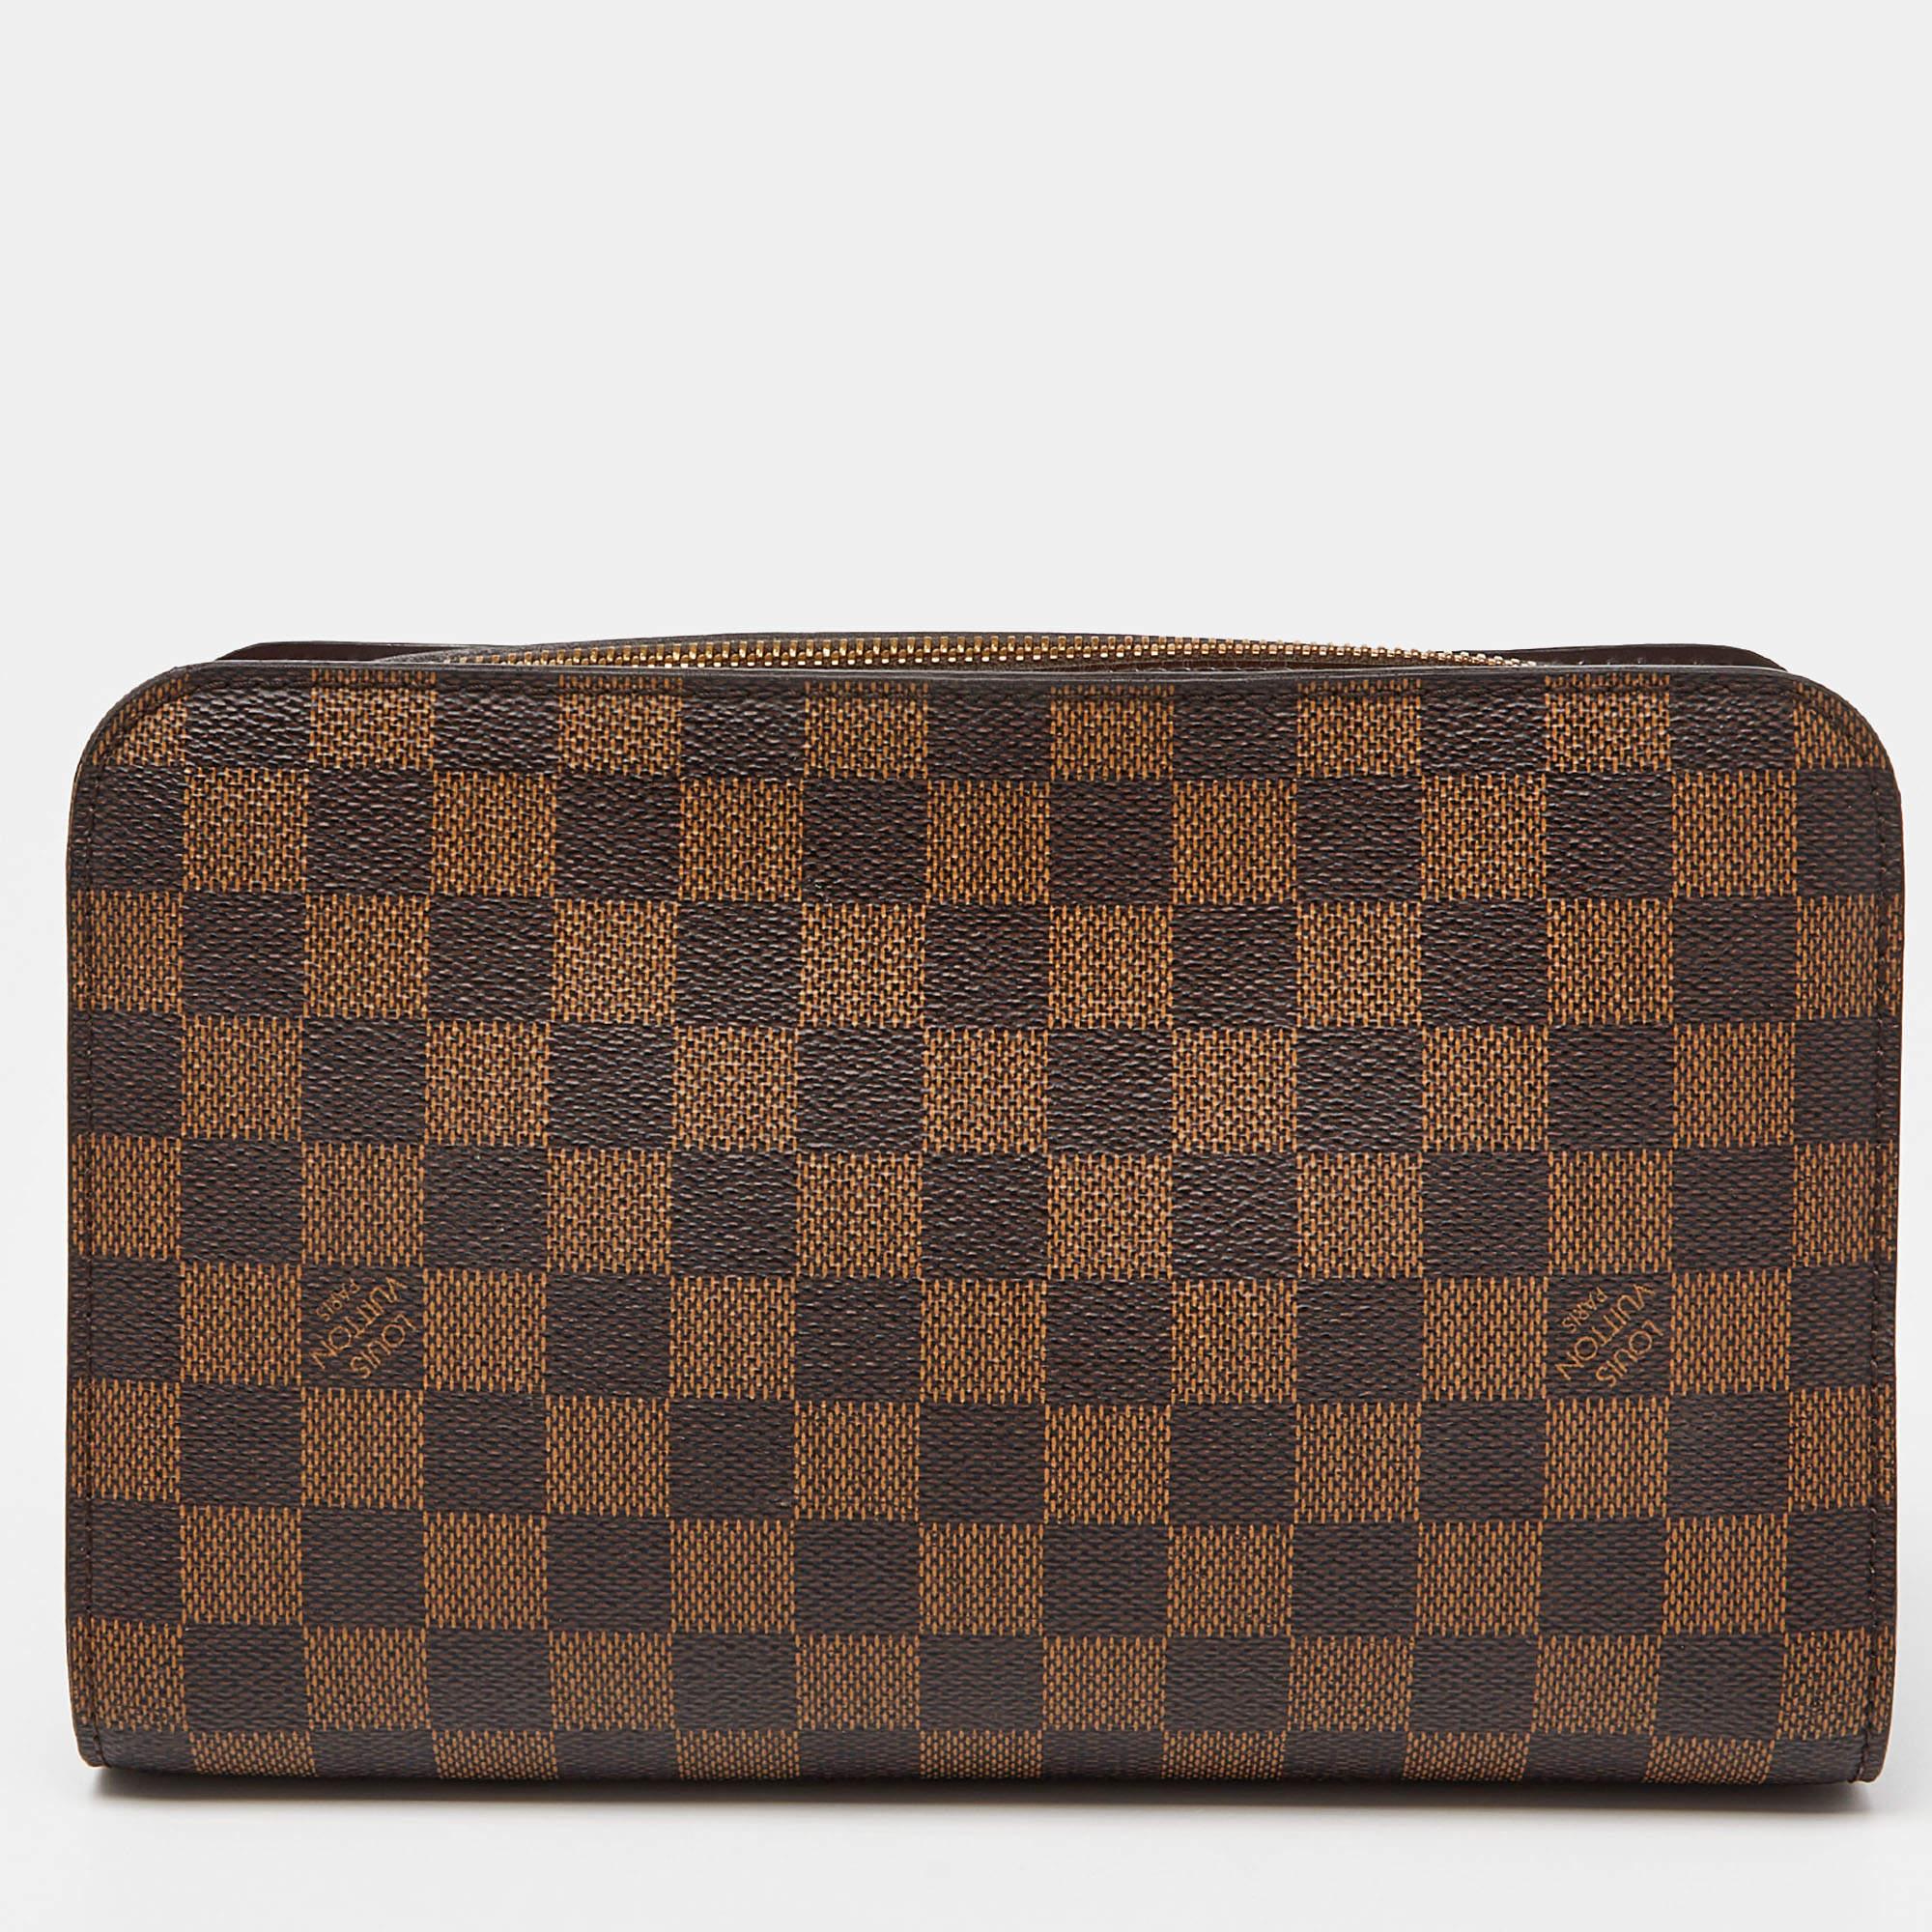 This Saint Louis Pochette clutch by Louis Vuitton is a simple yet smart design that makes for an amazing regular accessory. Crafted from the signature Damier Ebene coated canvas, this bag comes with a front slip pocket and one primary compartment